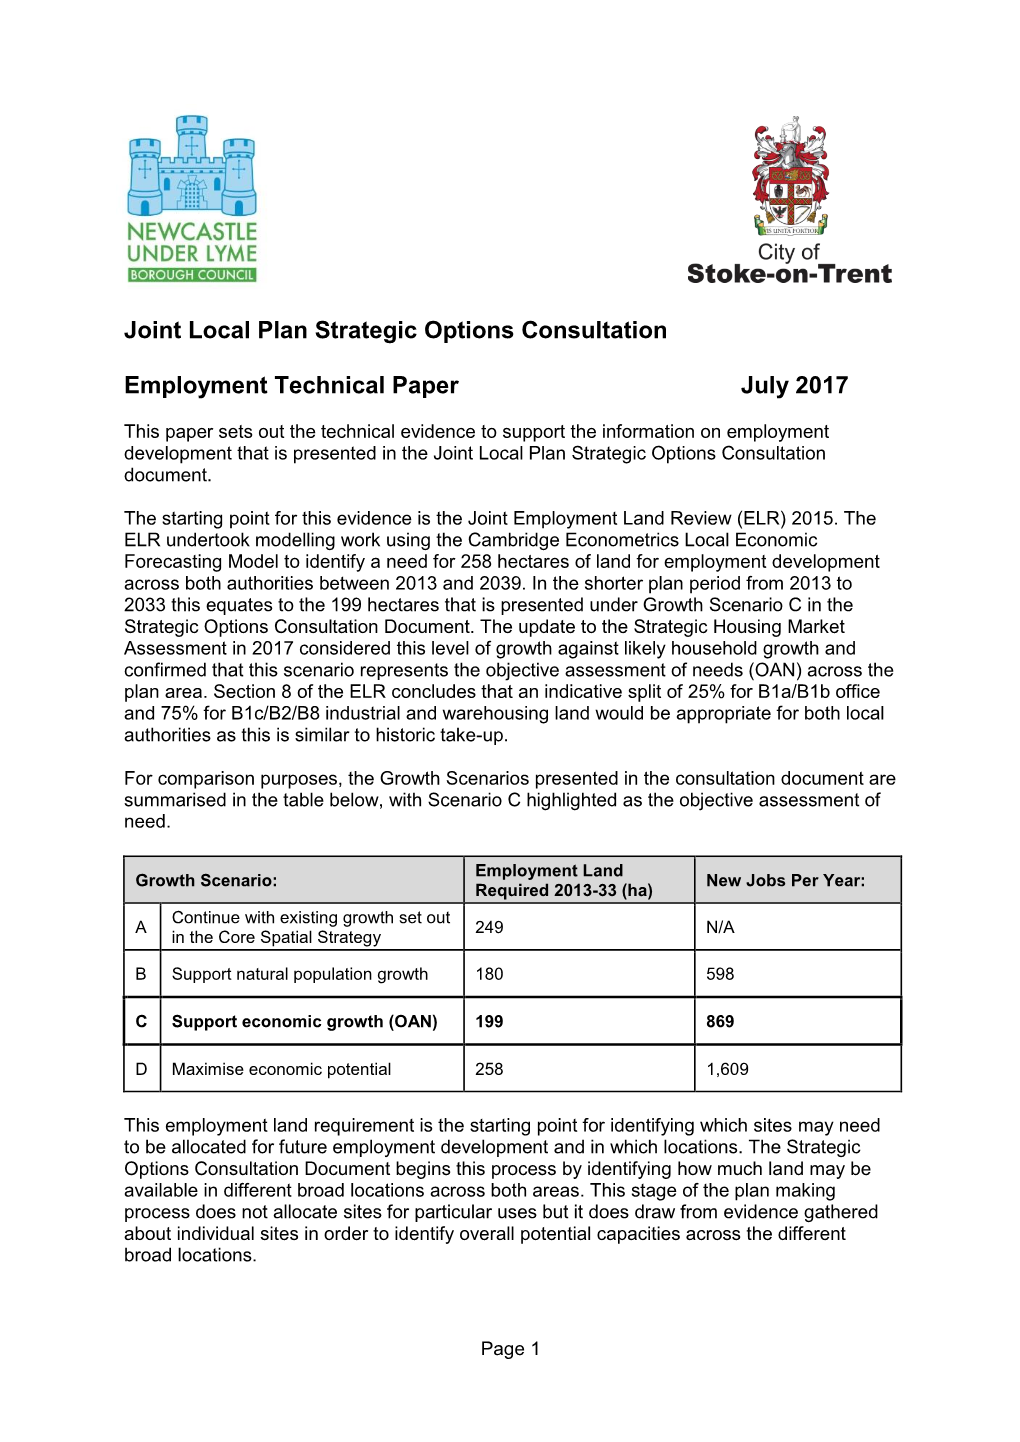 Joint Local Plan Strategic Options Consultation Employment